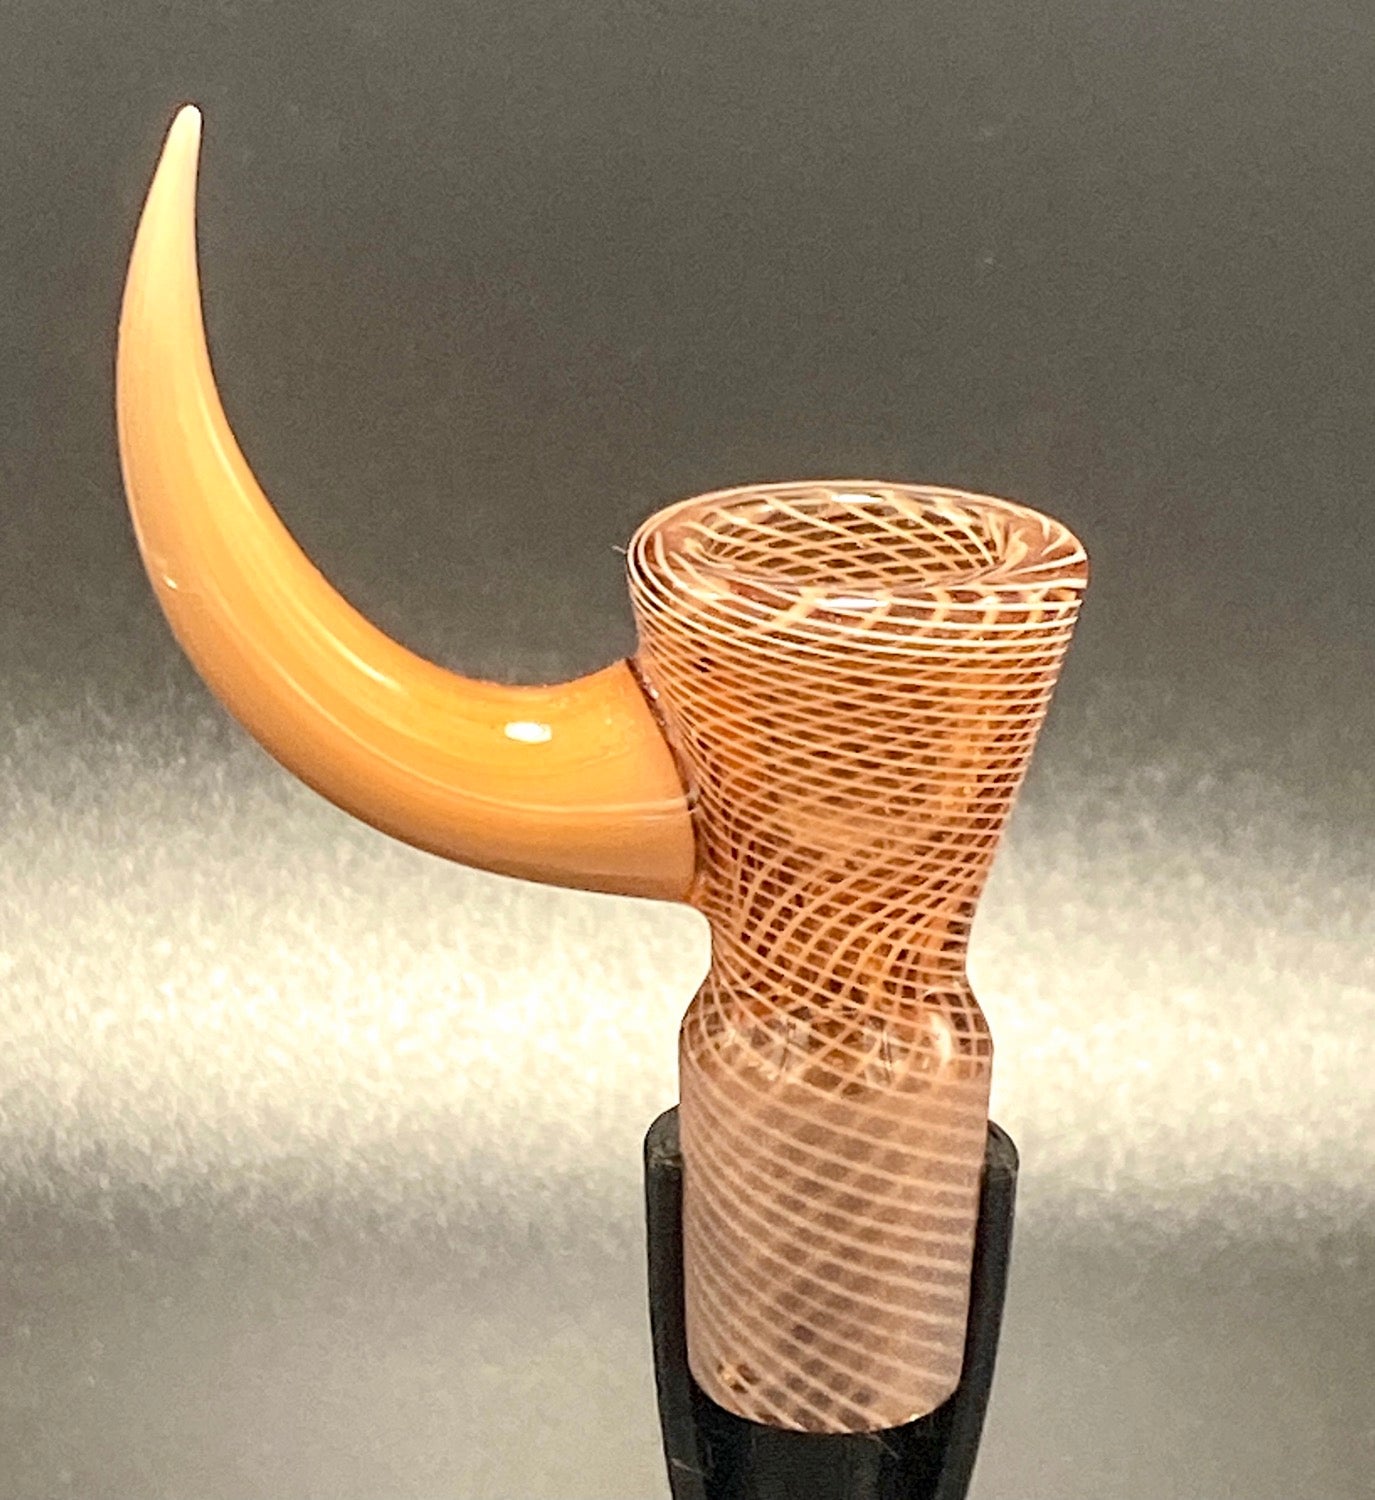 FULLY WORKED JOINT J-Honey Glassworks 18mm Reticello - TheSmokeyMcPotz Collection 